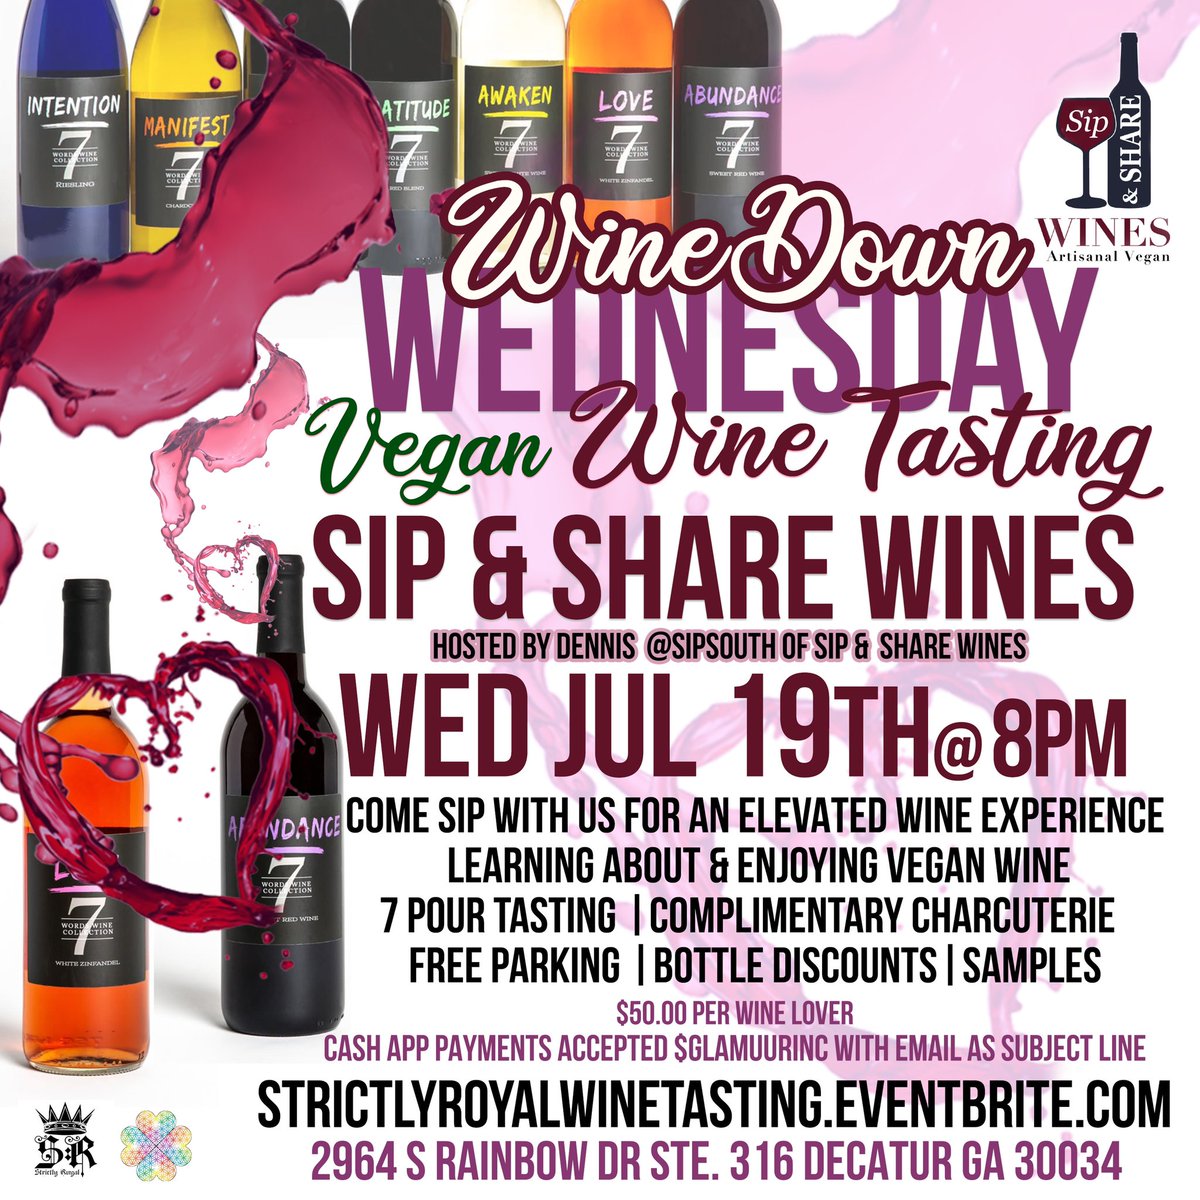 $10.00 OFF Early Bird Tickets On Sale Via Cash App ONLY !! $40 $GlamuurInc 🍷

7/19 Wine Down Wed Charcuterie & Wine Tasting w/ @sipandsharewines @sipsouth 8pm !! 

#atlantaevents #thingstodoinatlanta #thingstodoatl #winedownwednesday